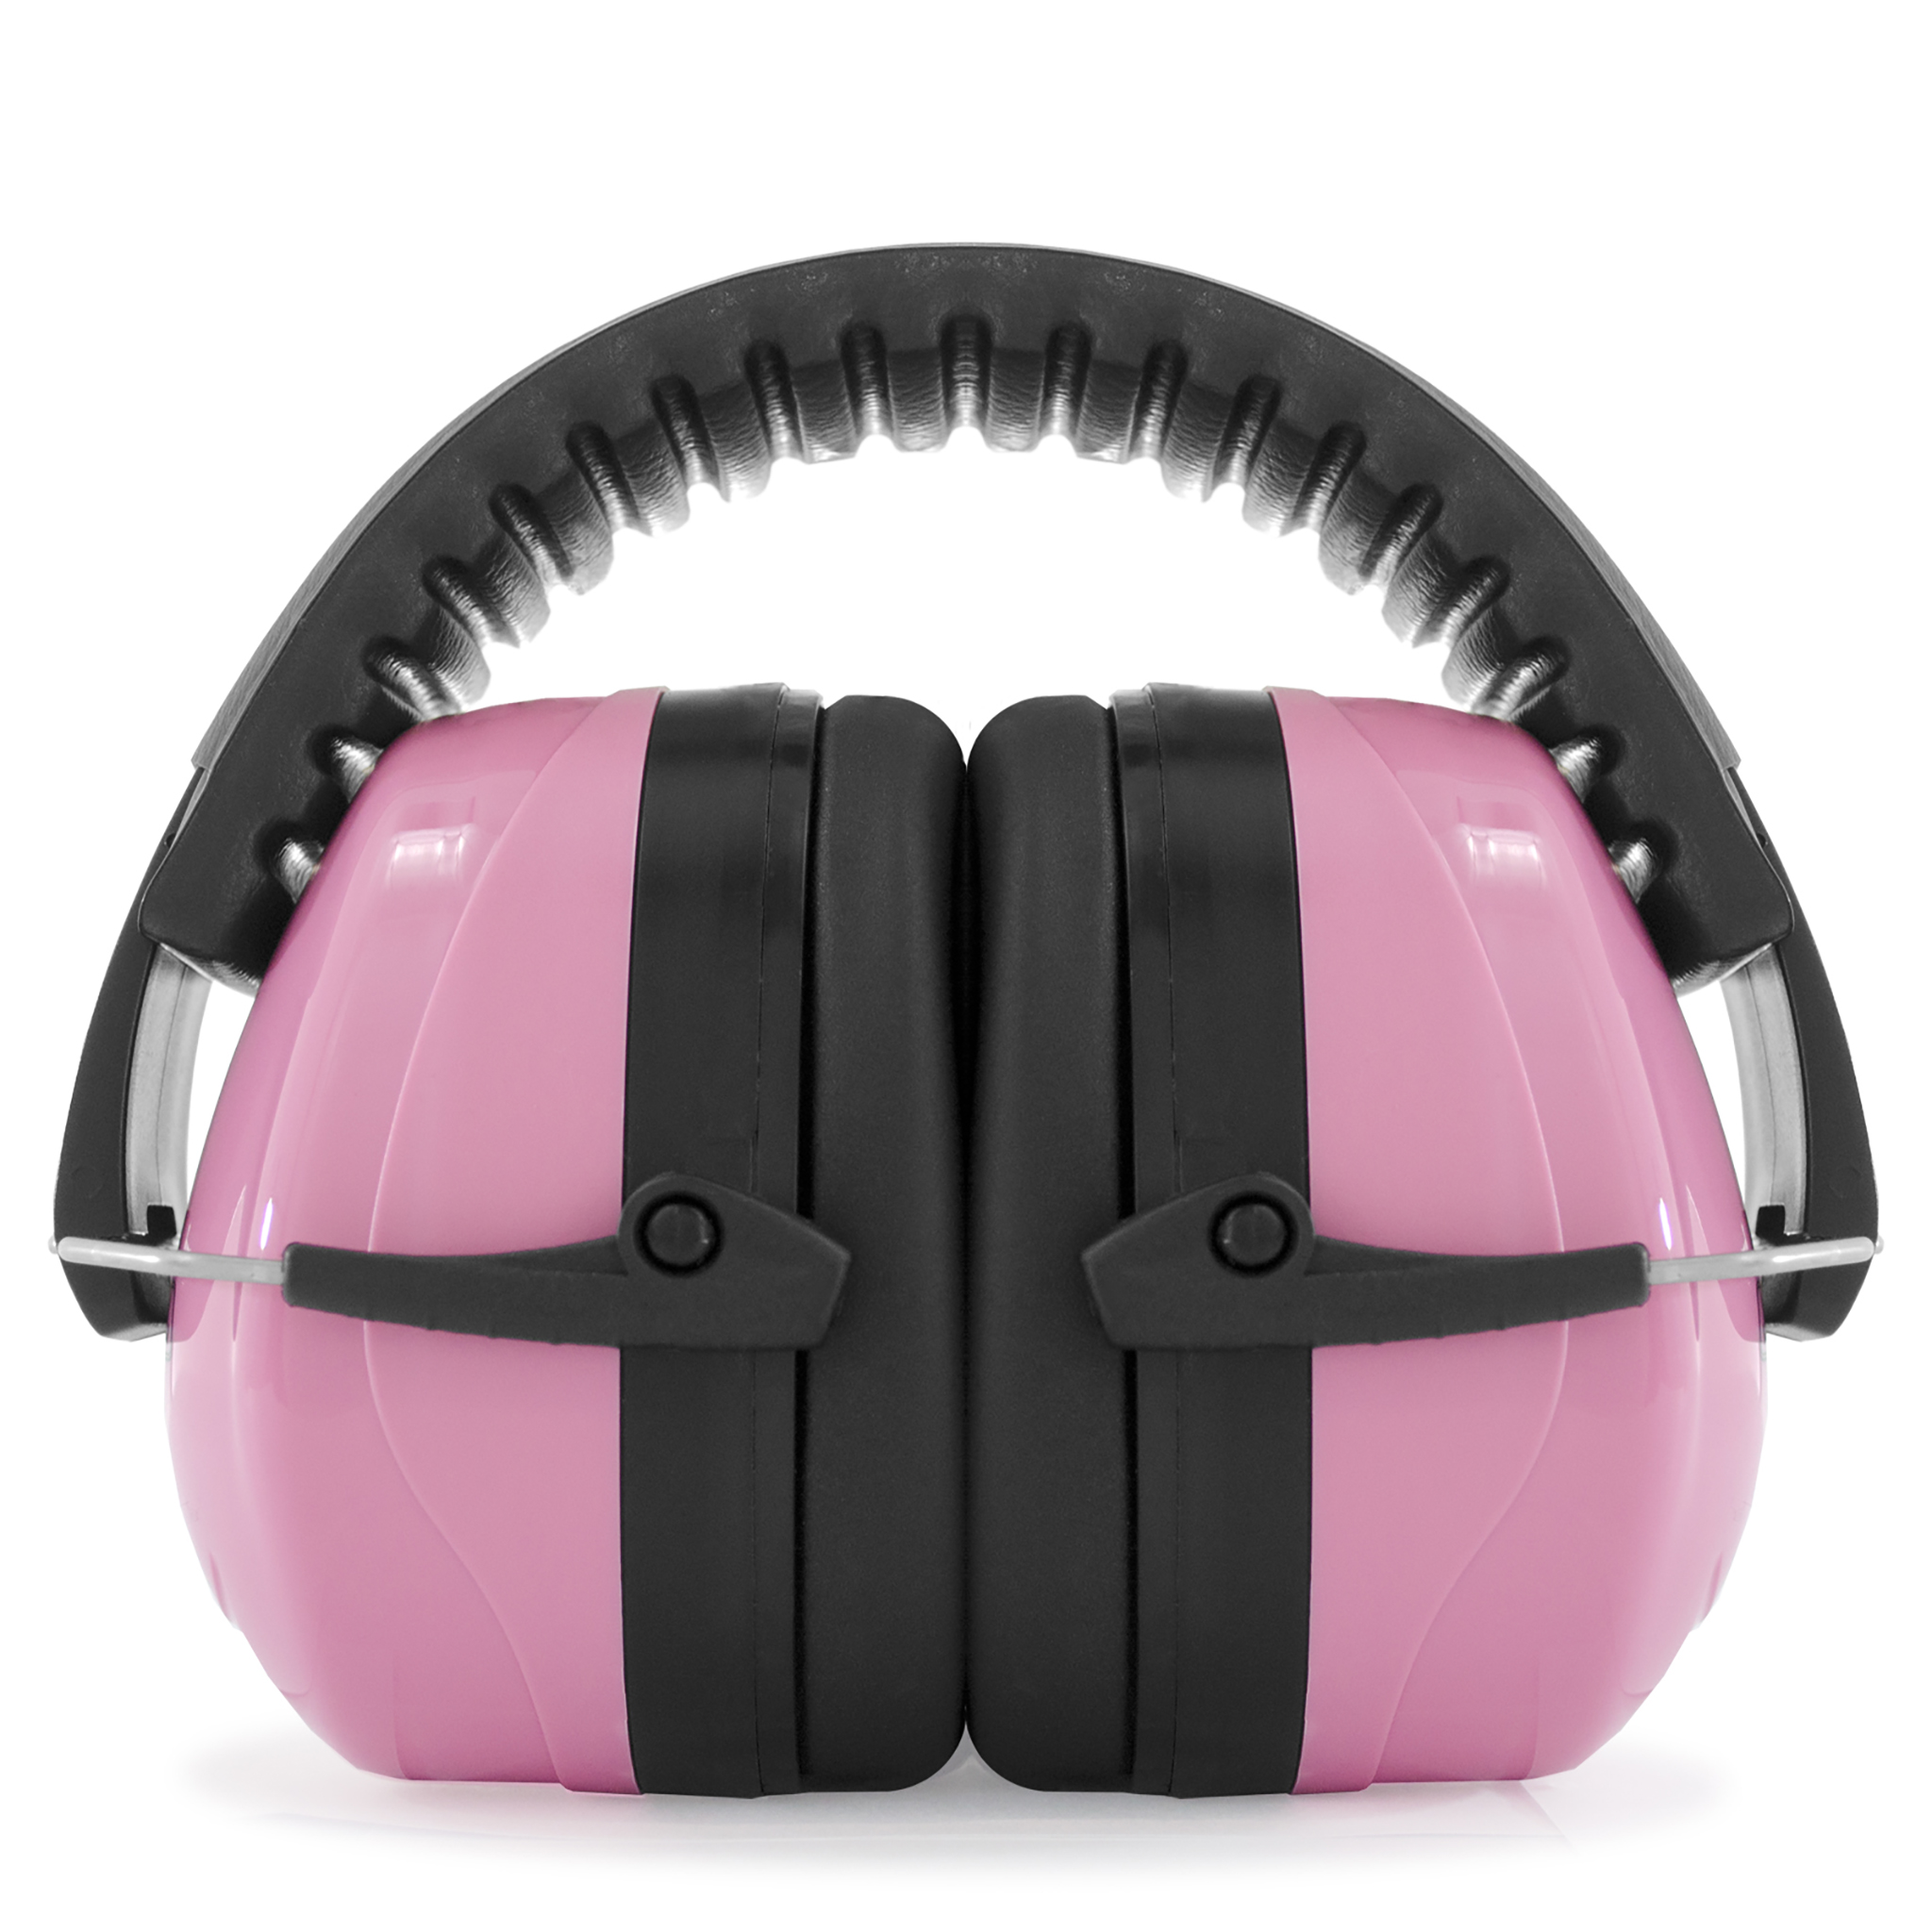 Sound Suppressing Safety Earmuffs Protection for NRR:23dB ANSI Hearing – Technopack Corporation 